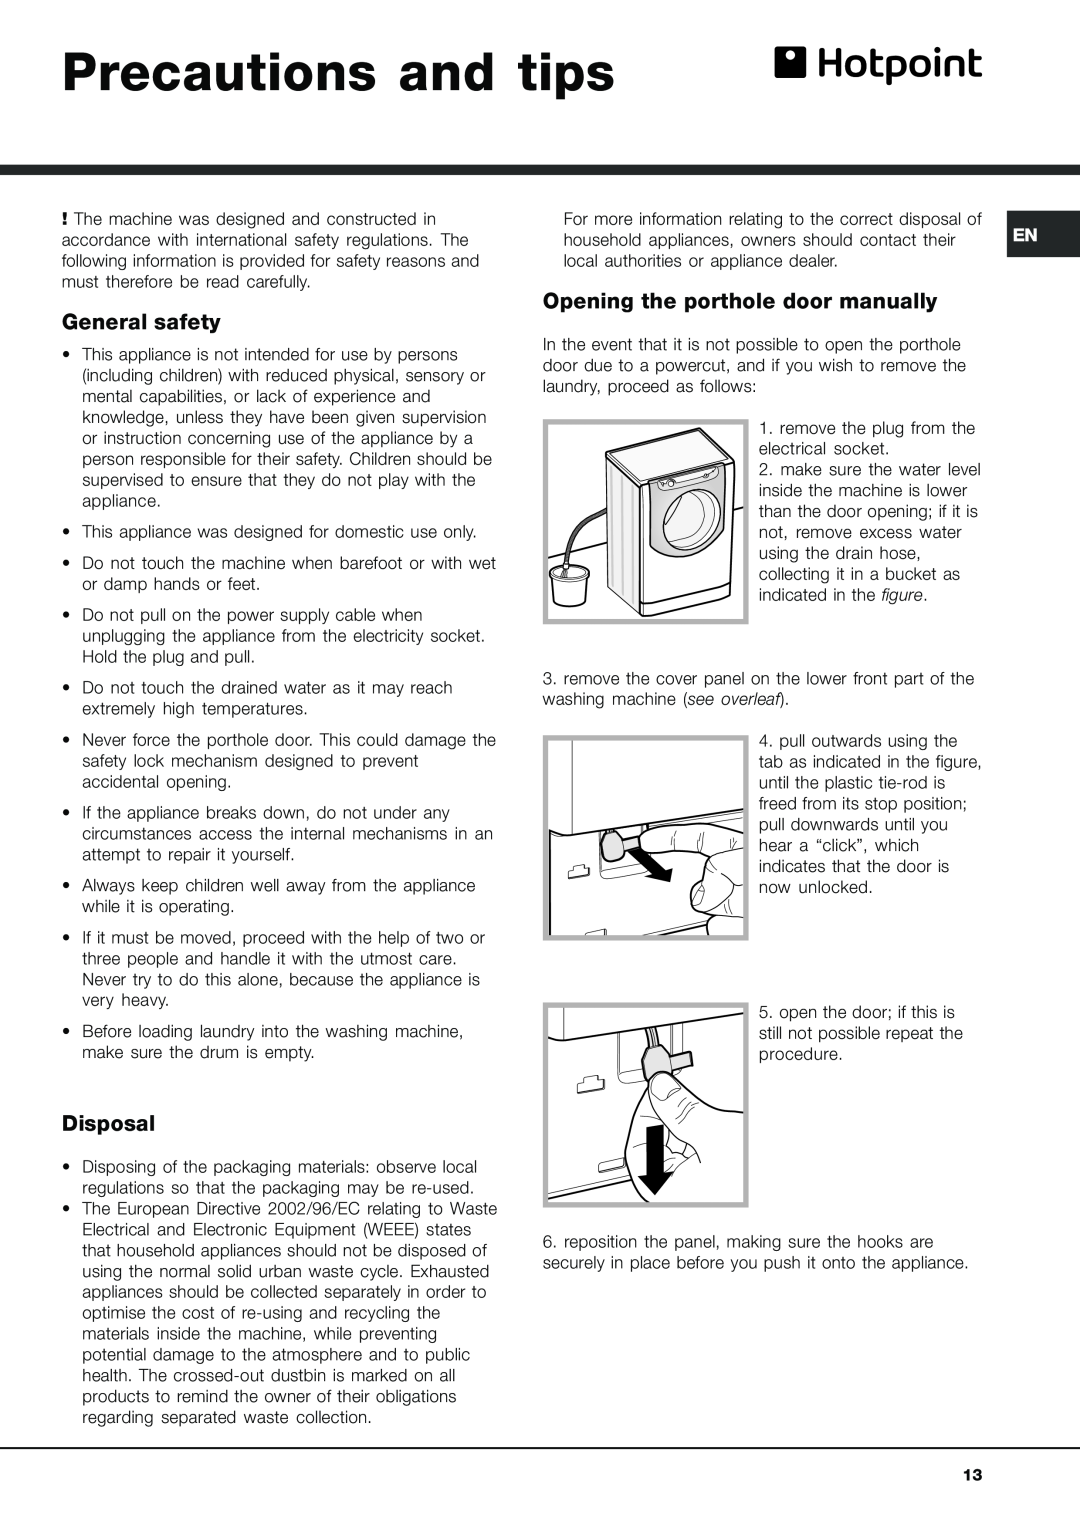 Hotpoint AQLF9F 49 U Precautions and tips, General safety, Disposal, Opening the porthole door manually 